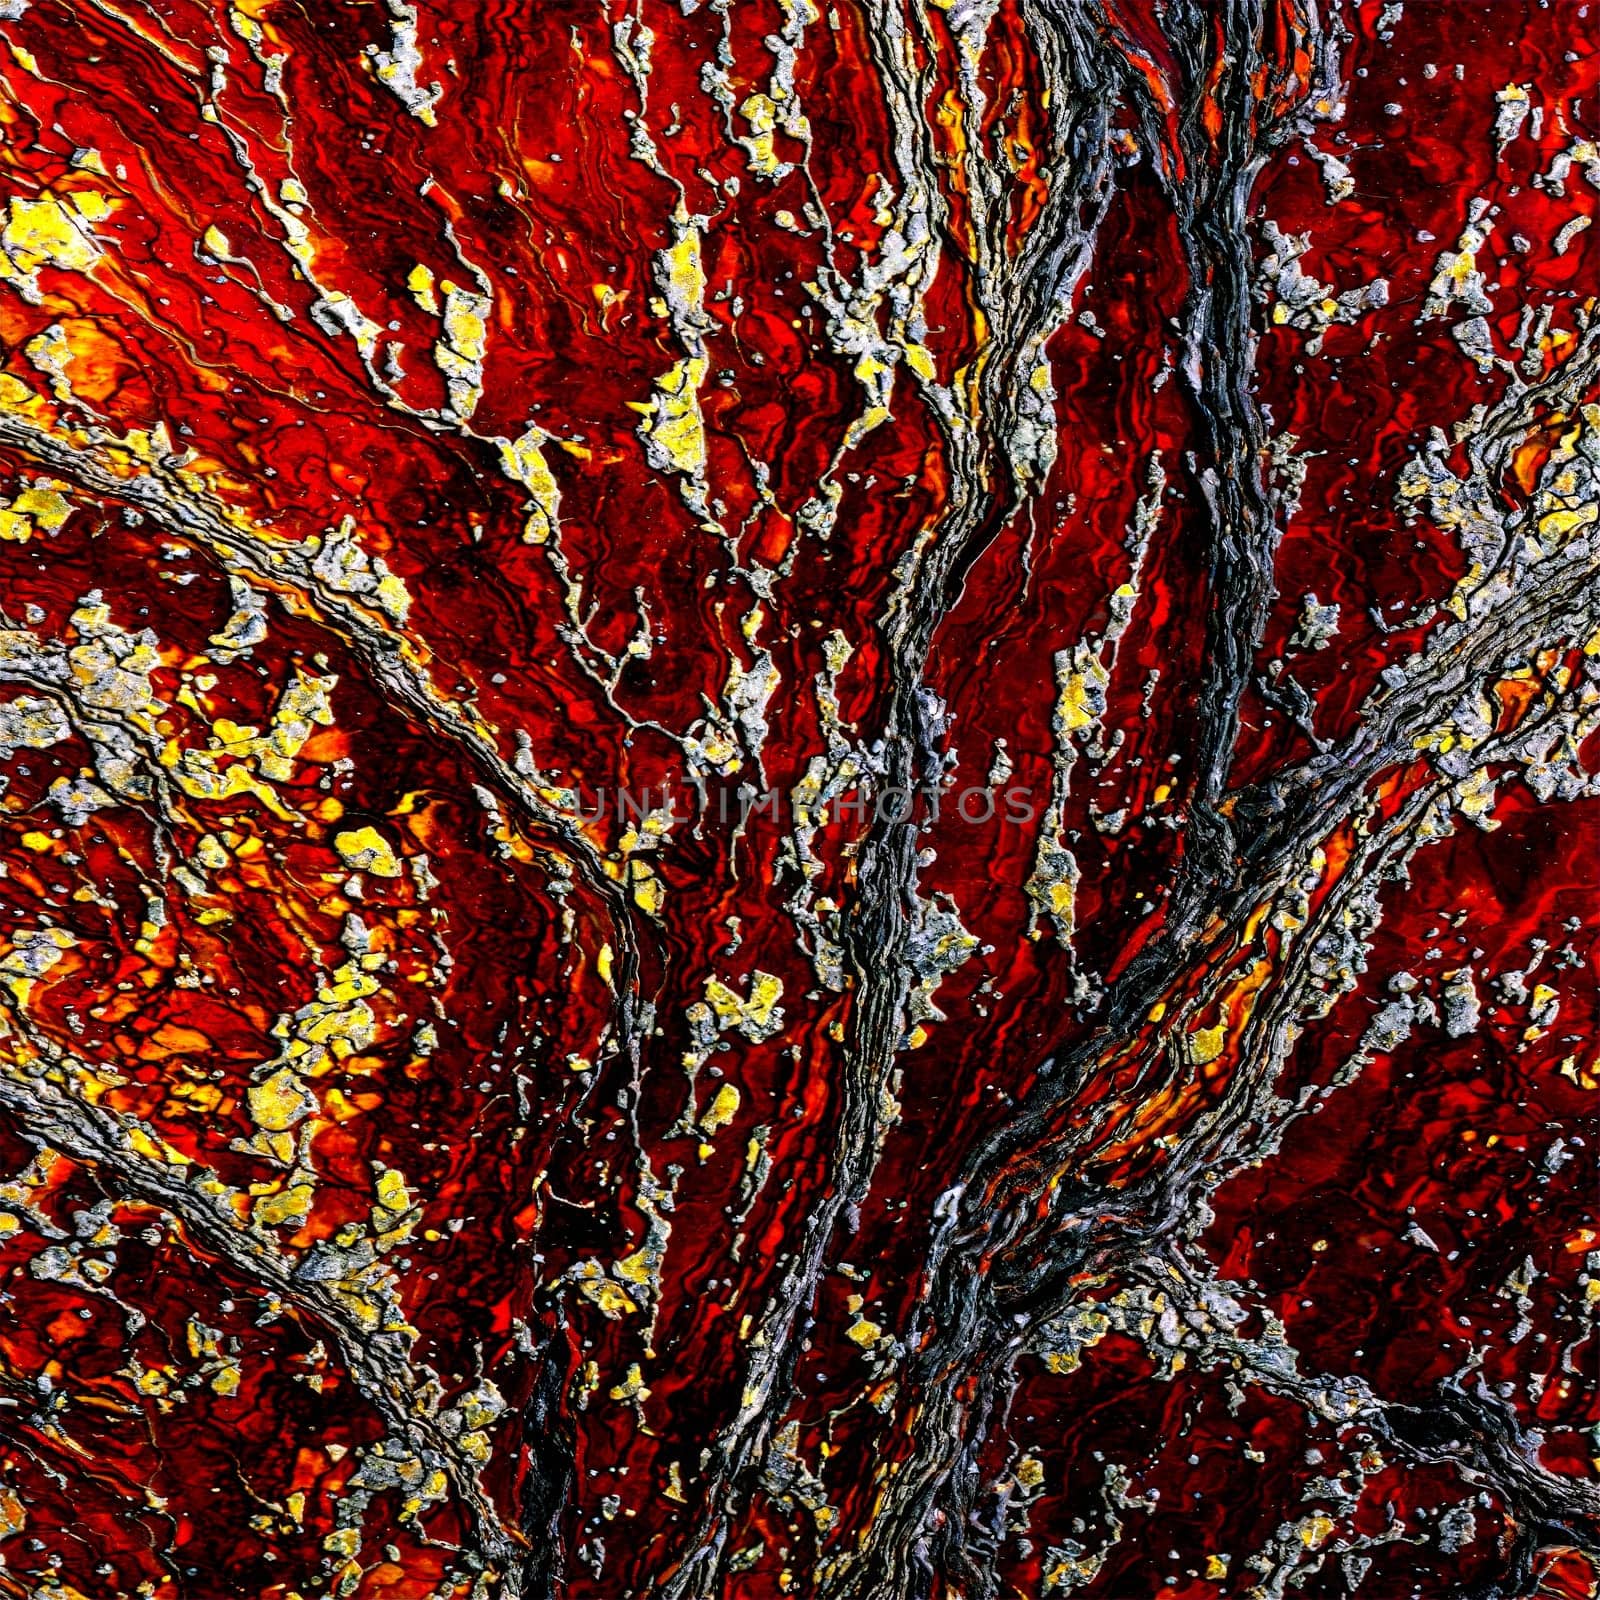 Jasper A red and yellow jasper with a polished surface slowly rotating to reveal its by panophotograph